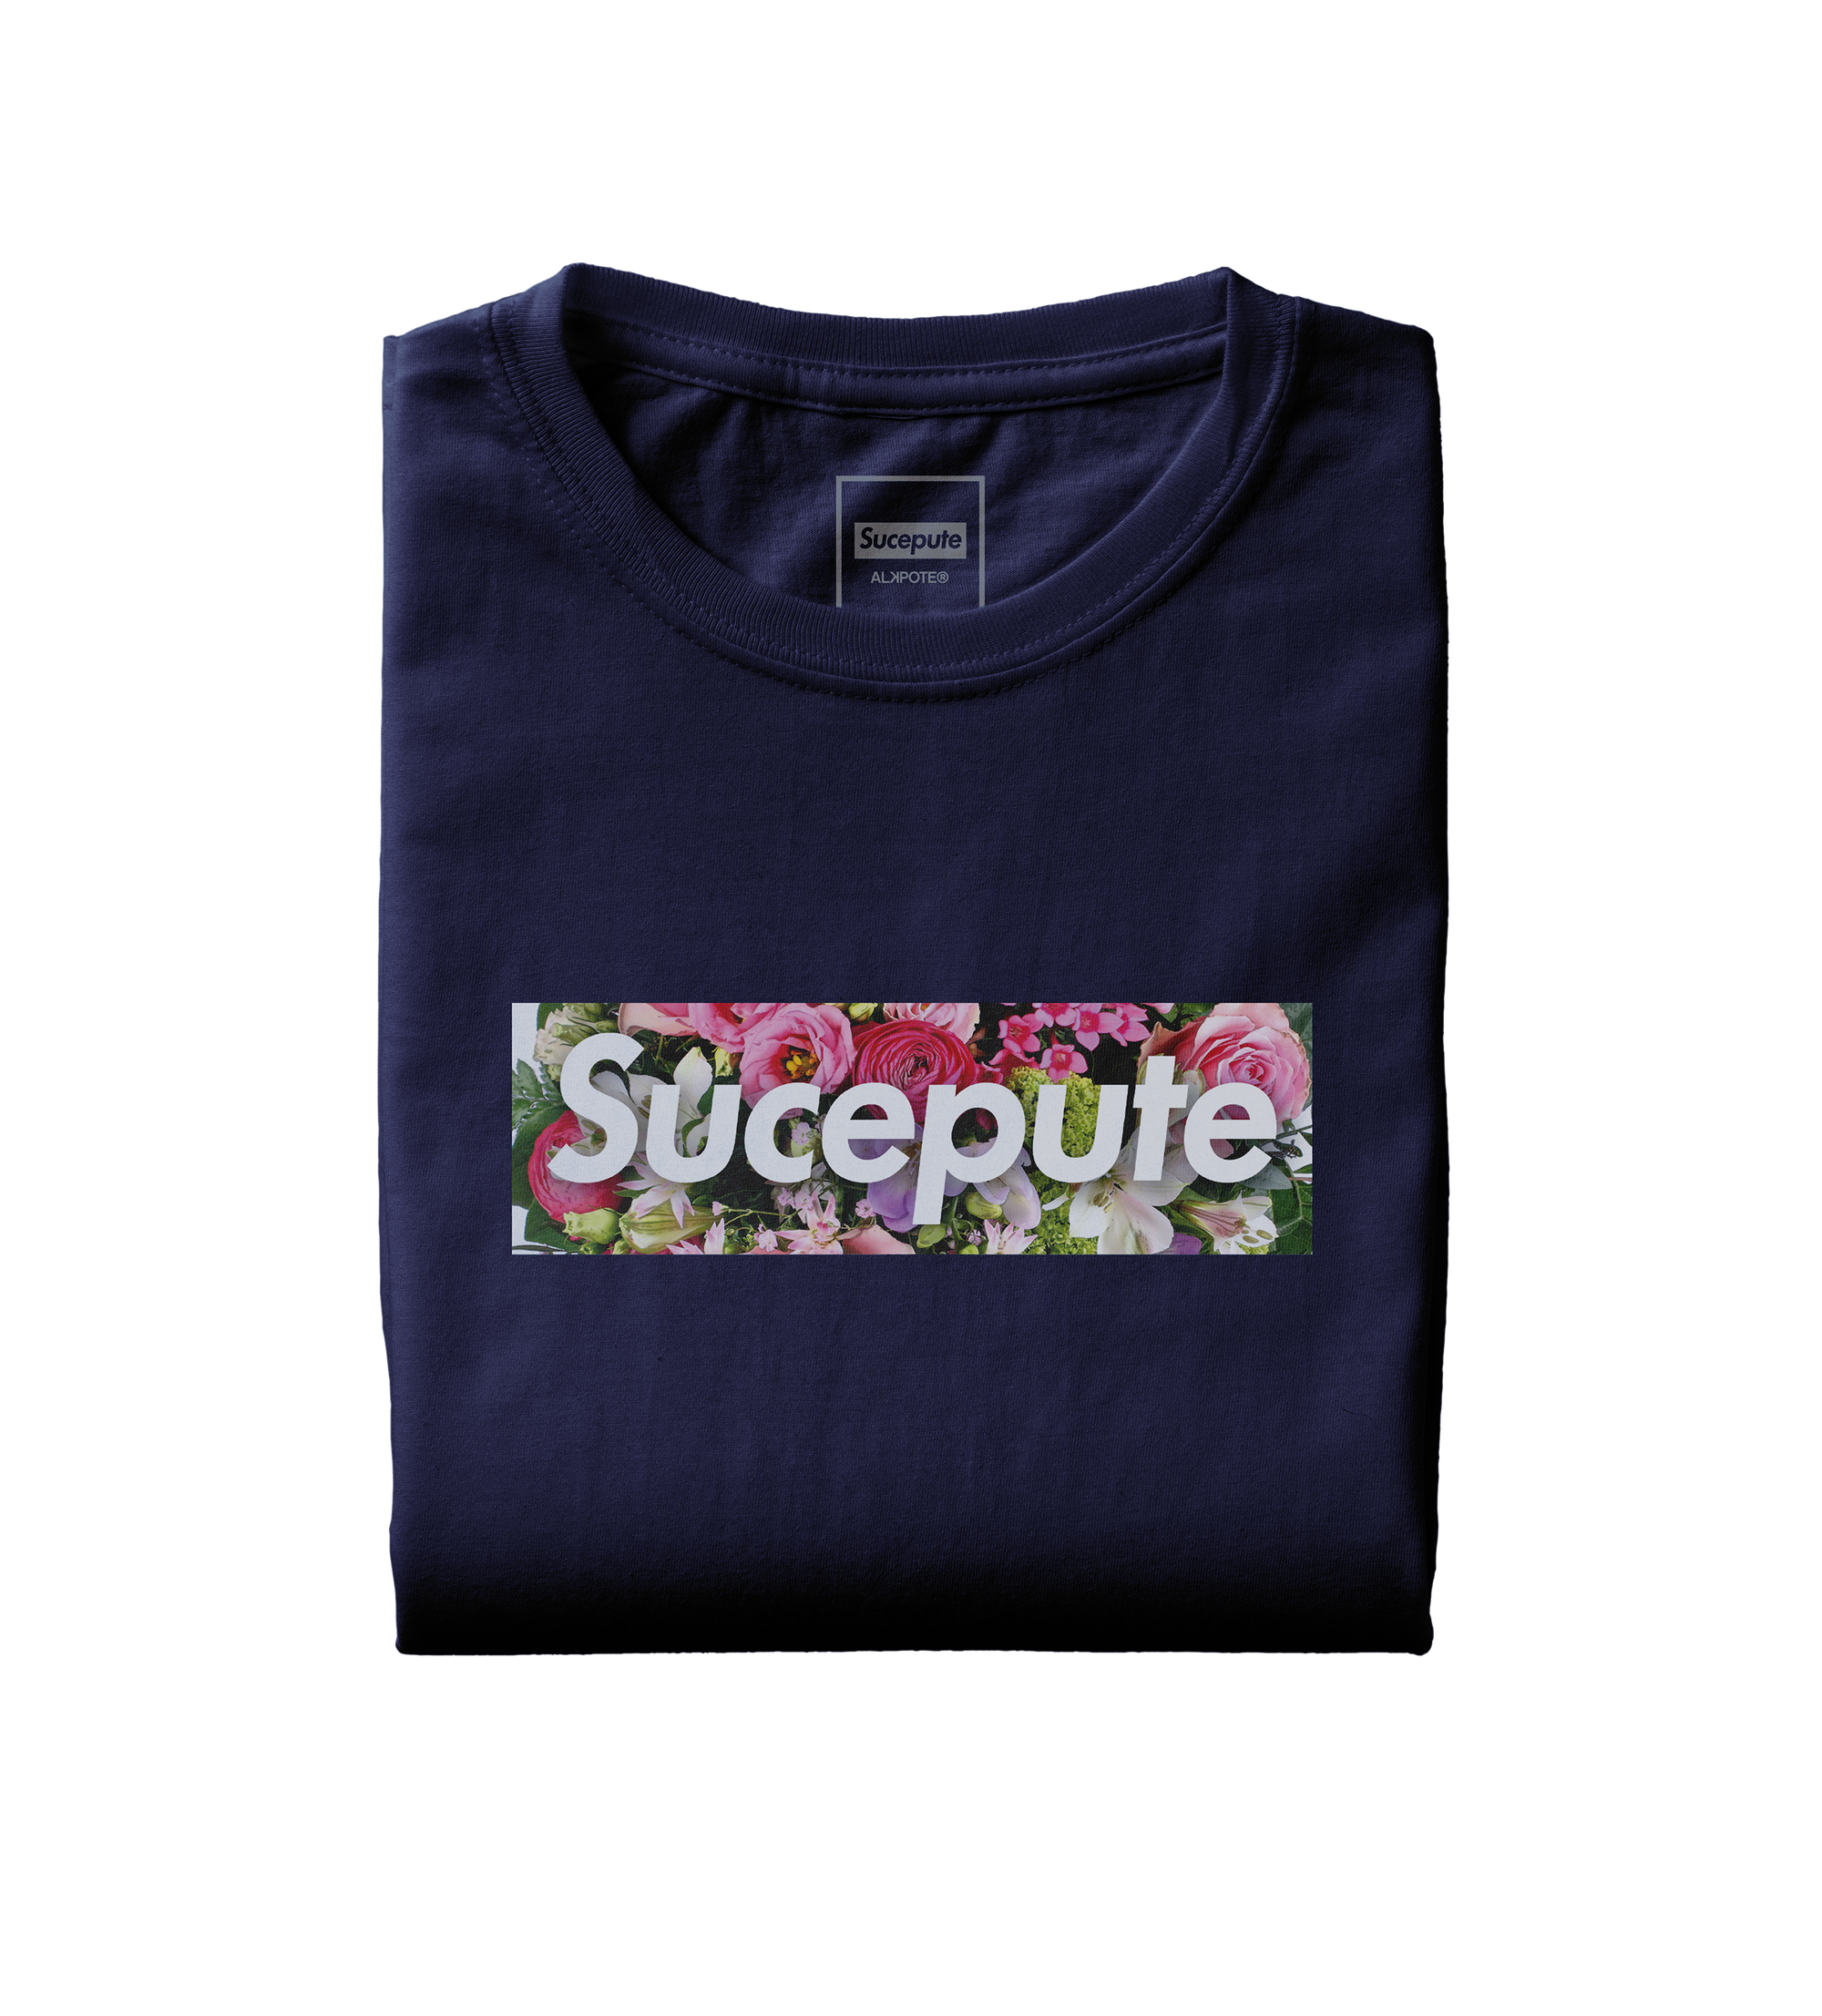 T-SHIRT MANCHES COURTES | "SUCEPUTE FLOWERS" - Navy